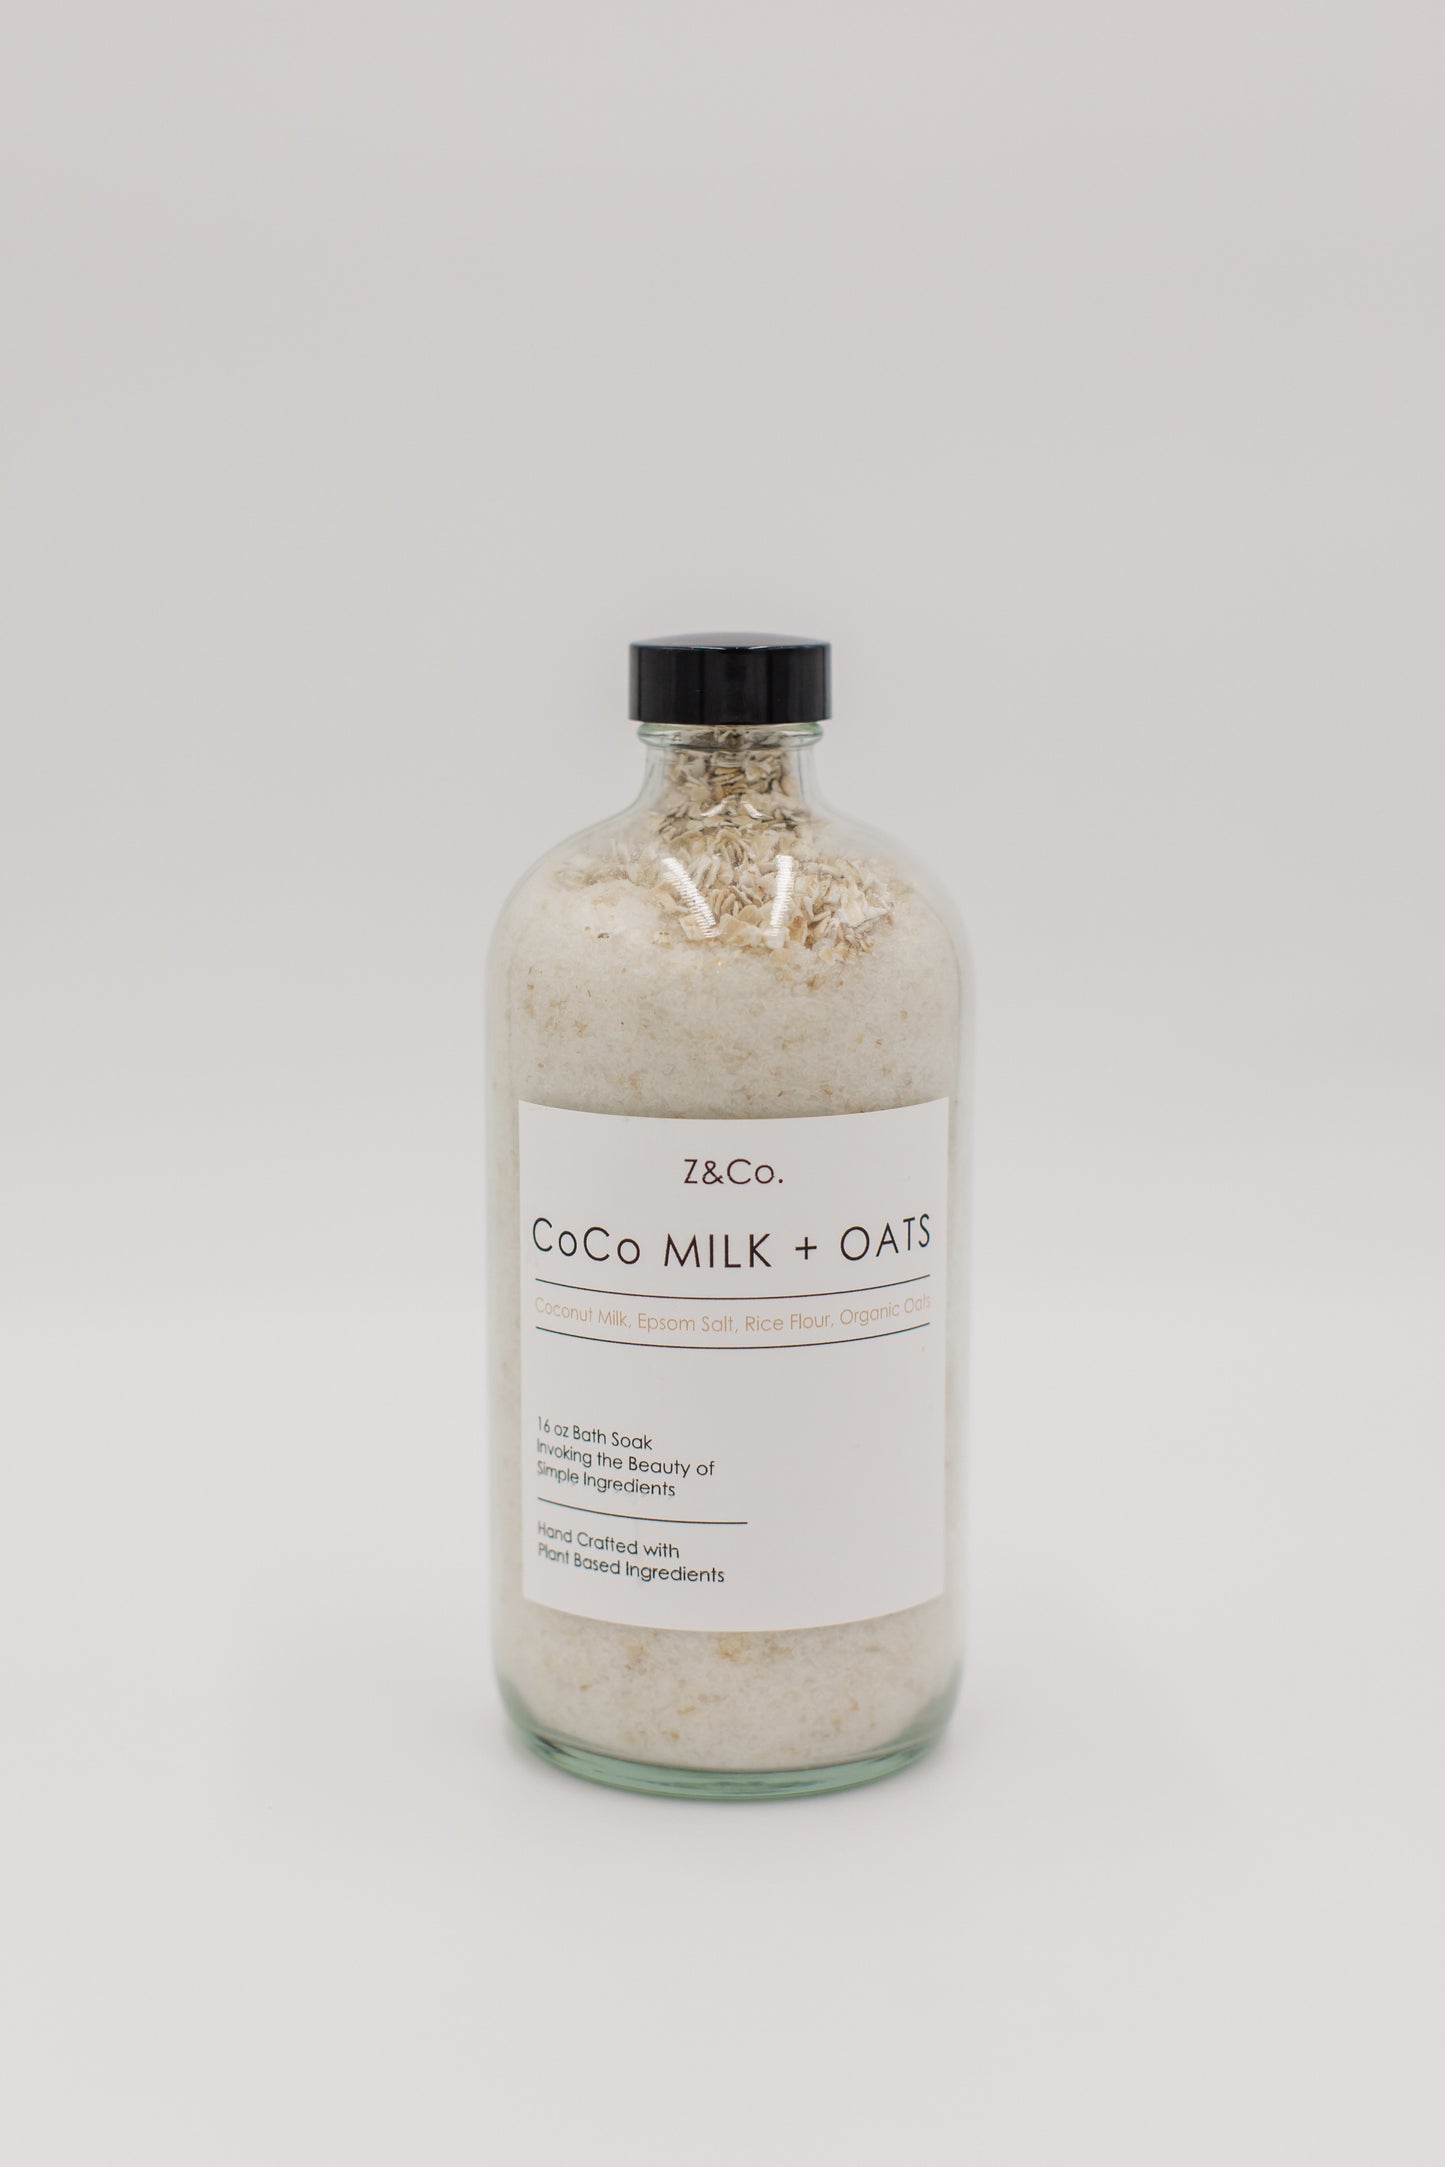 Market Collection 'Coco Milk + Oats'